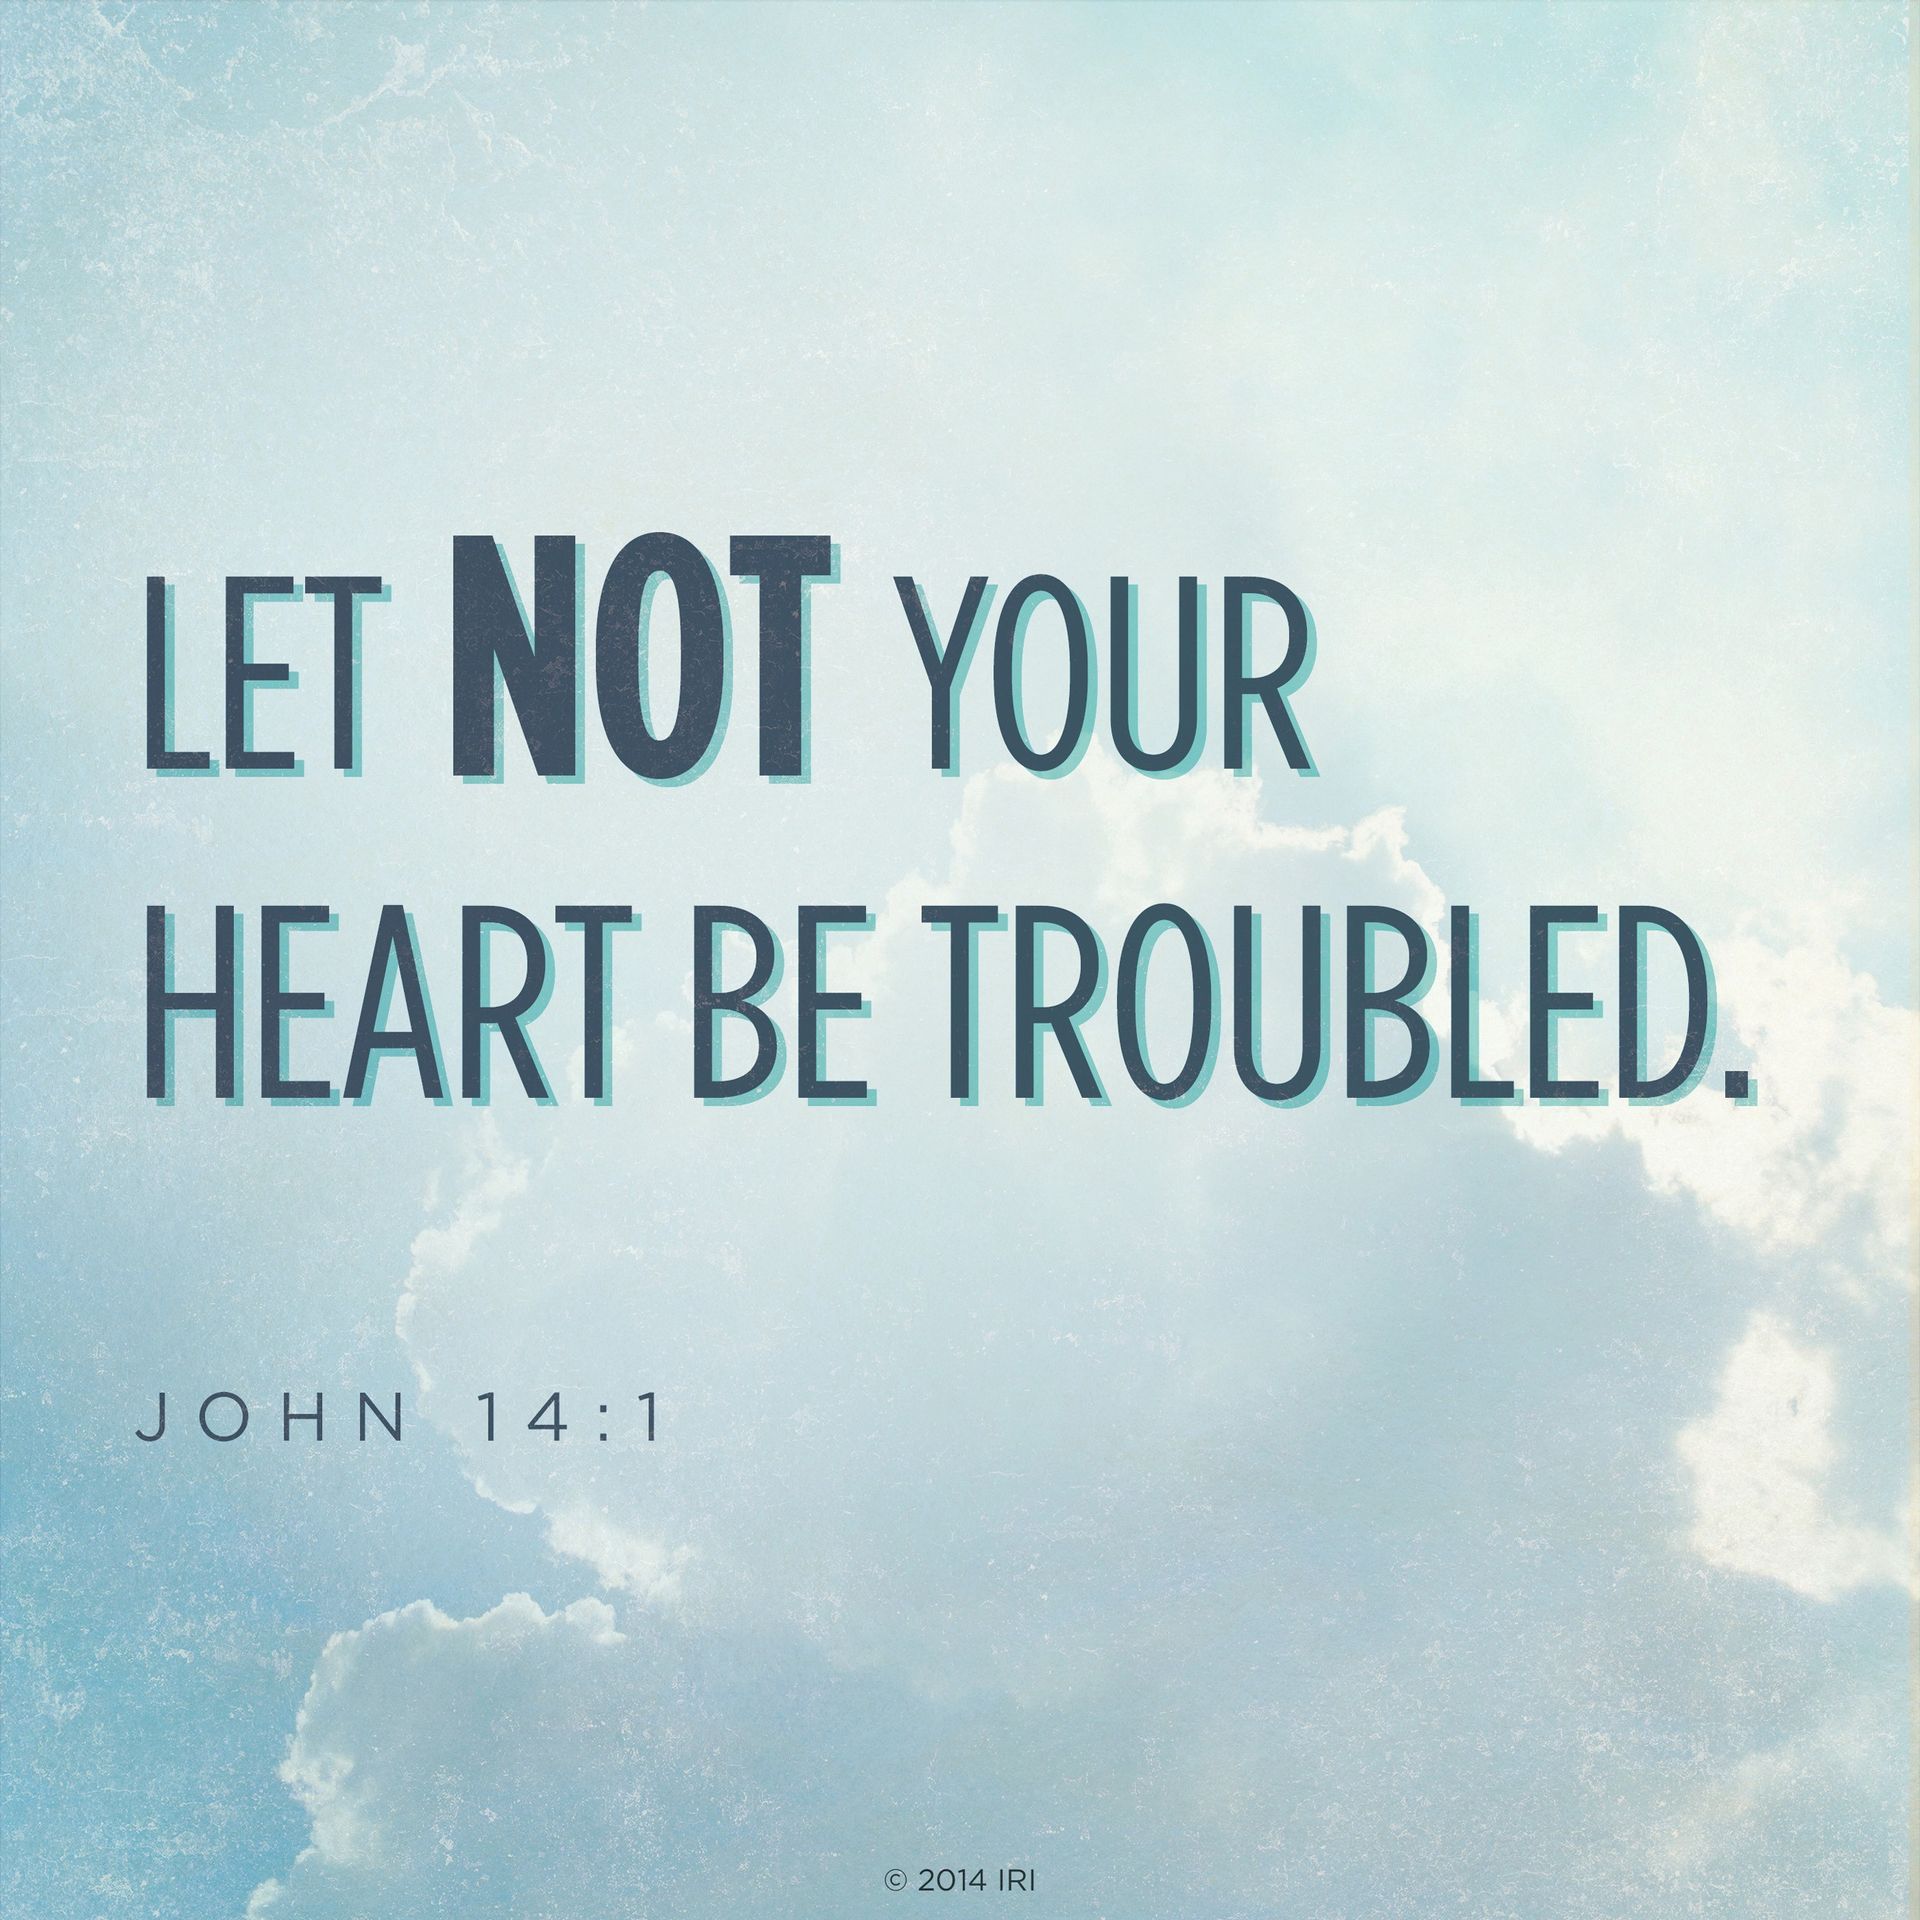 “Let not your heart be troubled.”—John 14:1